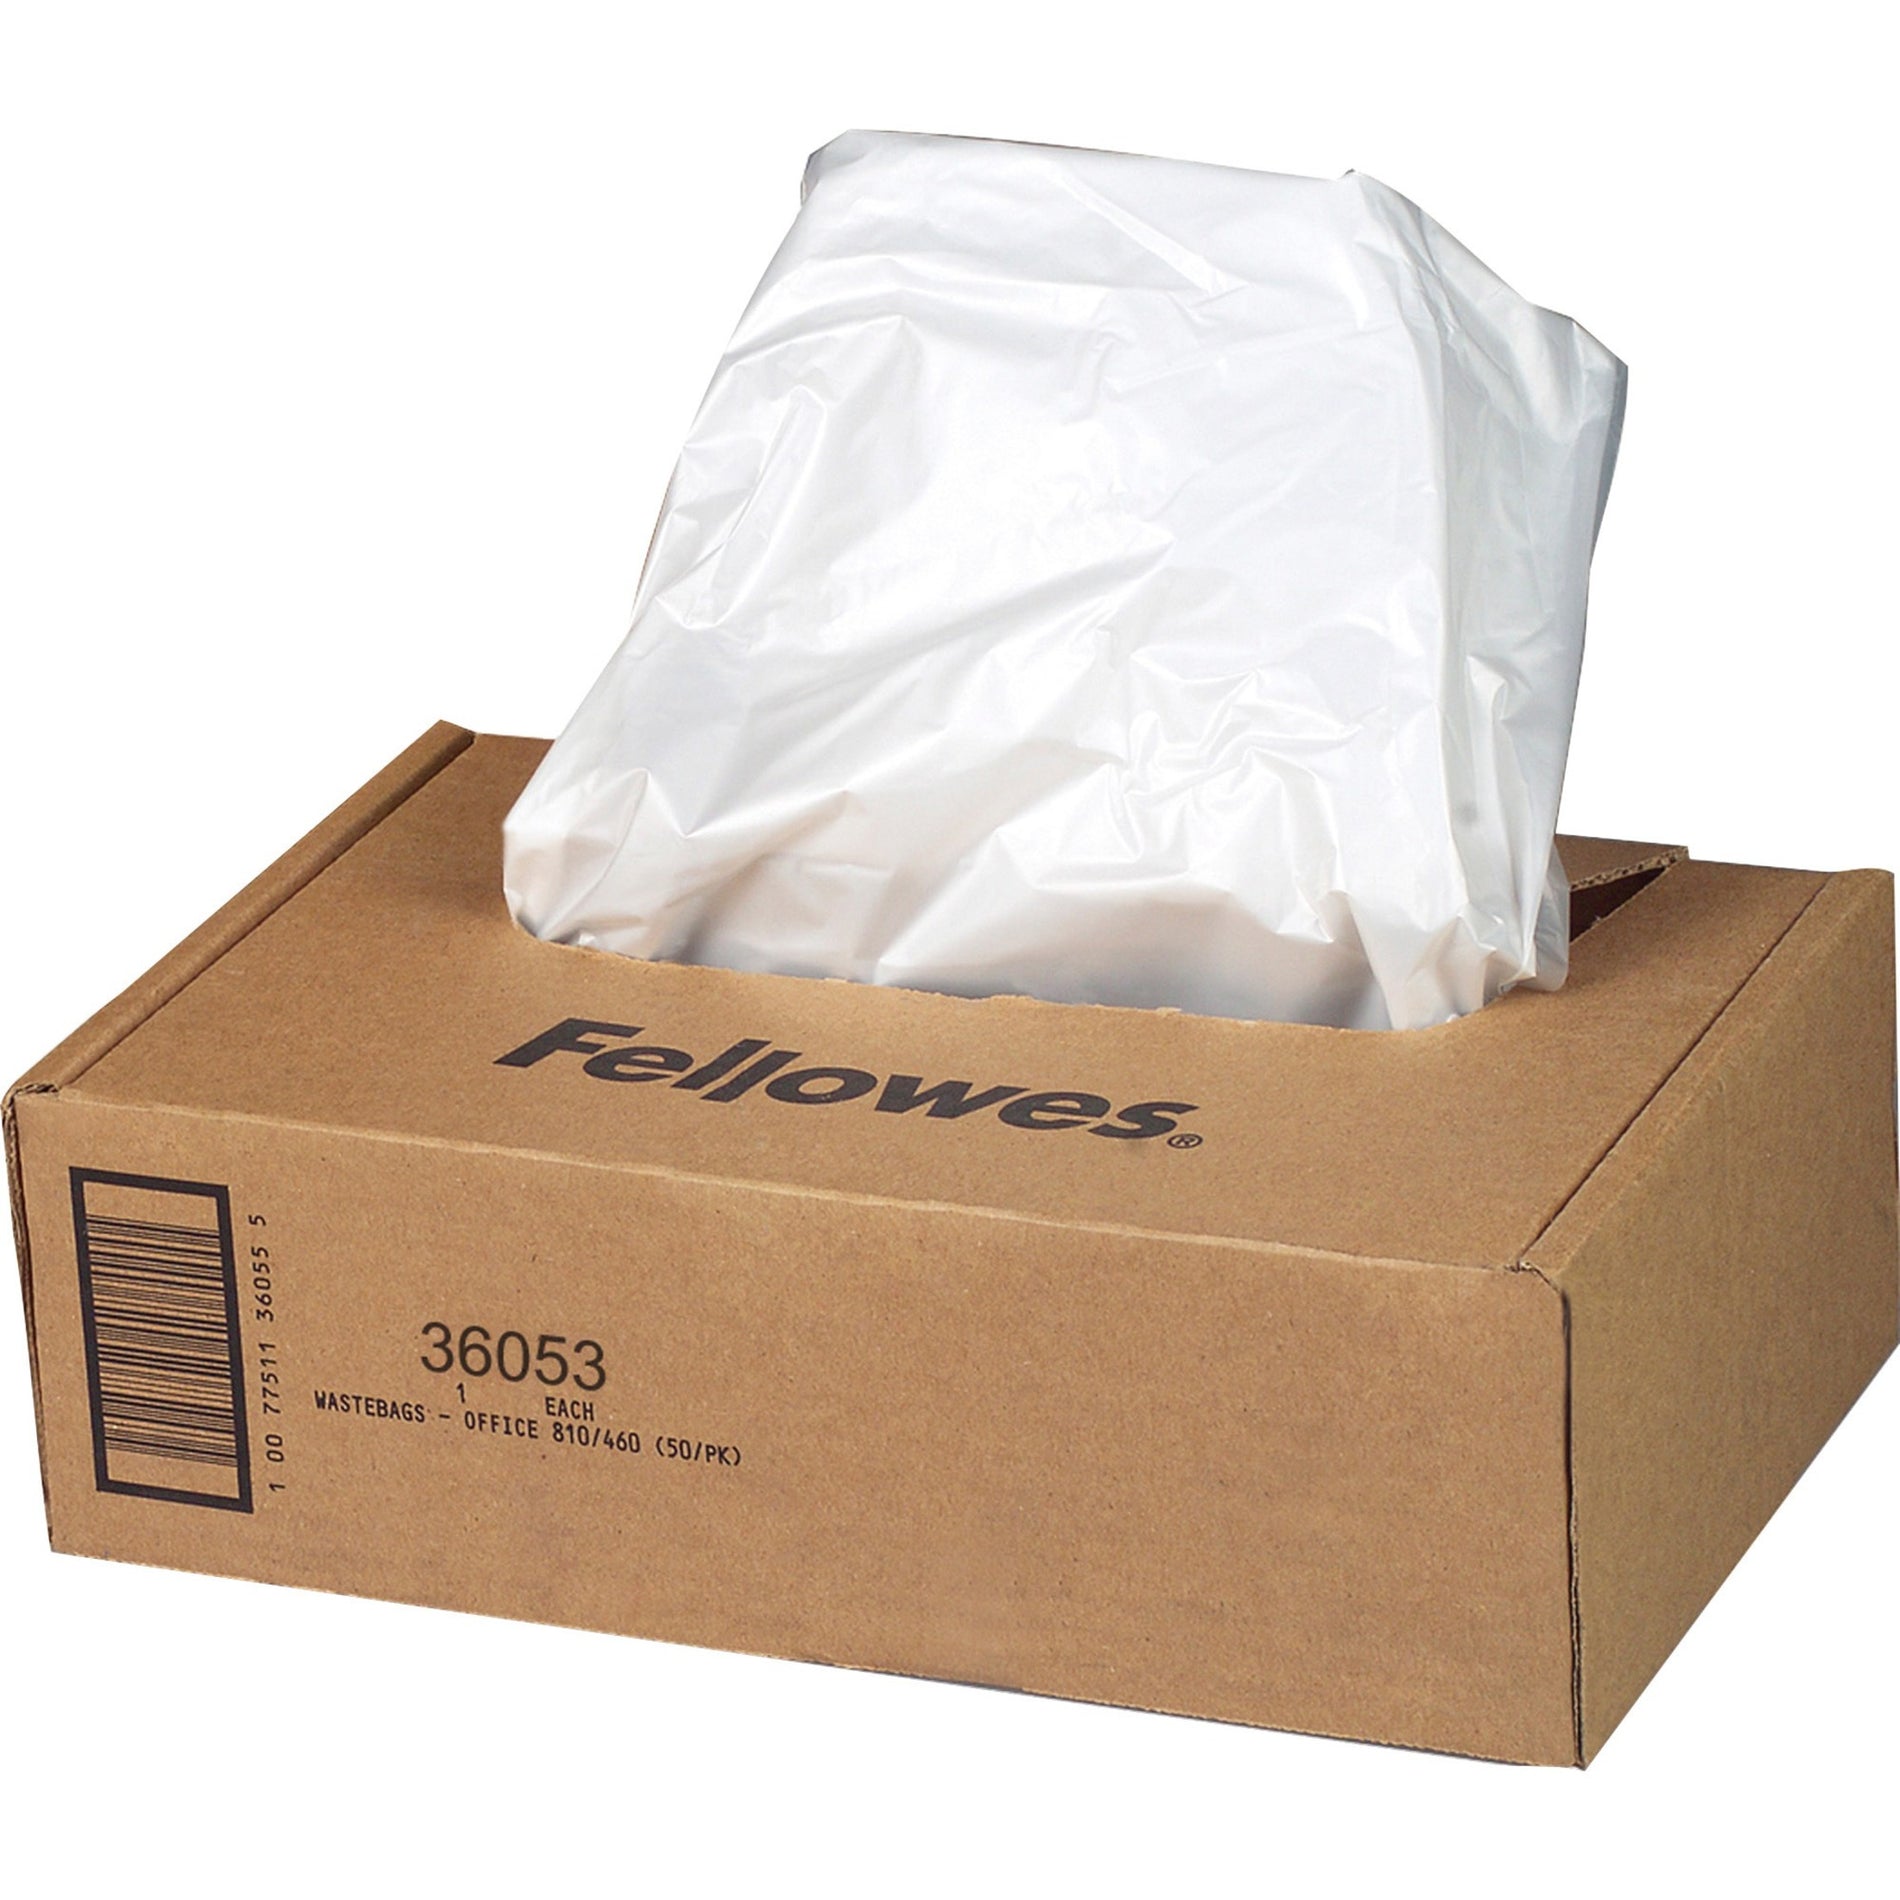 Fellowes 36053 AutoMax 130C/200C Shredder Waste Bags, Durable, Disposable, Recyclable, 9 gal, Clear, 100/Box